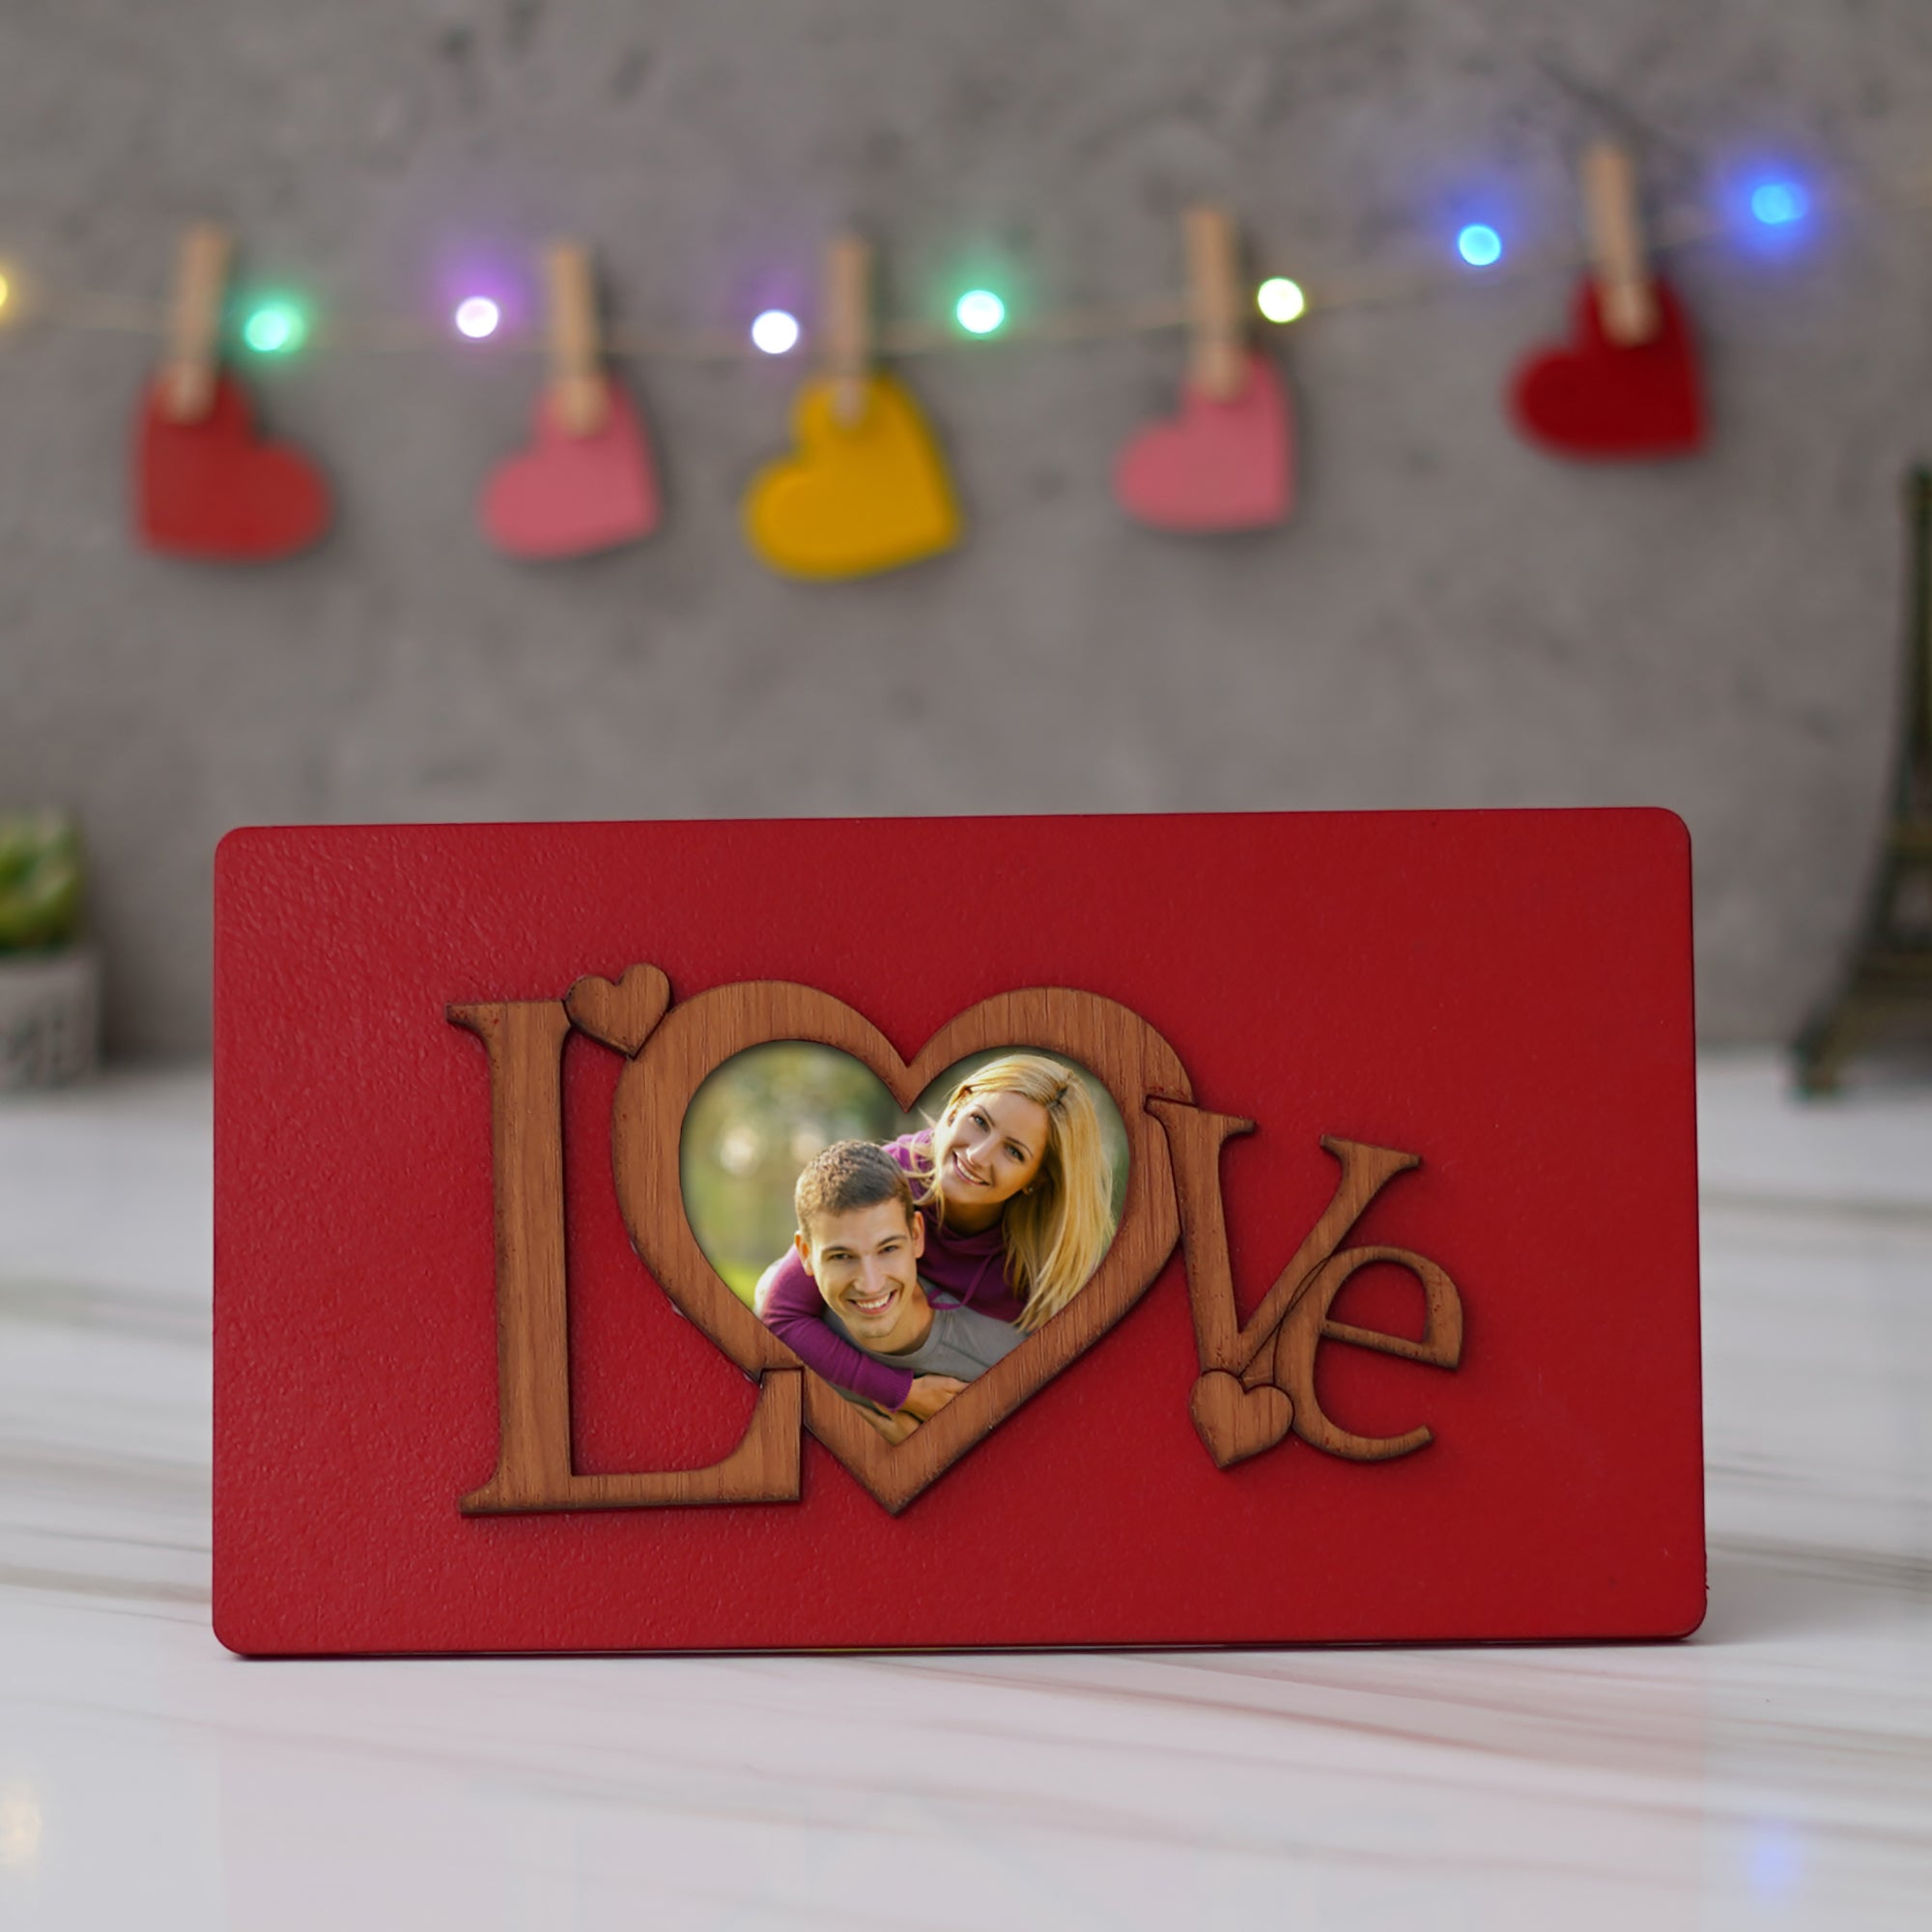 Valentine Combo of "Love" Wooden Photo Frame With Red Stand, Colorful Girl and Boy "Sweet I Love You" Kissing Figurine 1